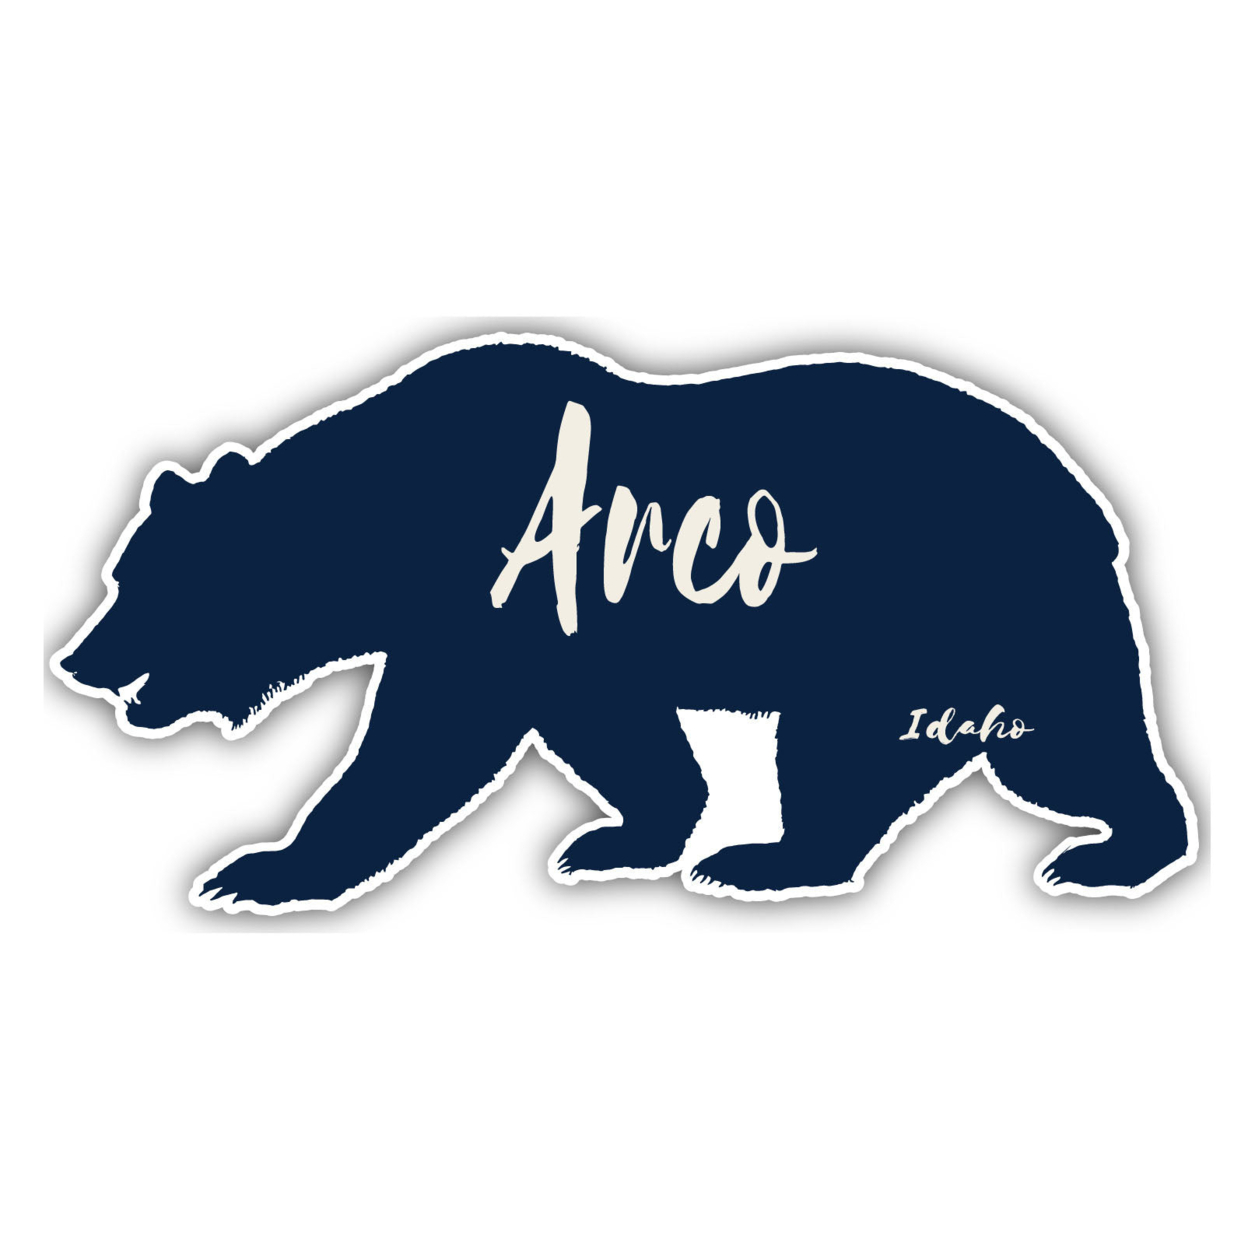 Arco Idaho Souvenir Decorative Stickers (Choose Theme And Size) - 4-Pack, 6-Inch, Bear